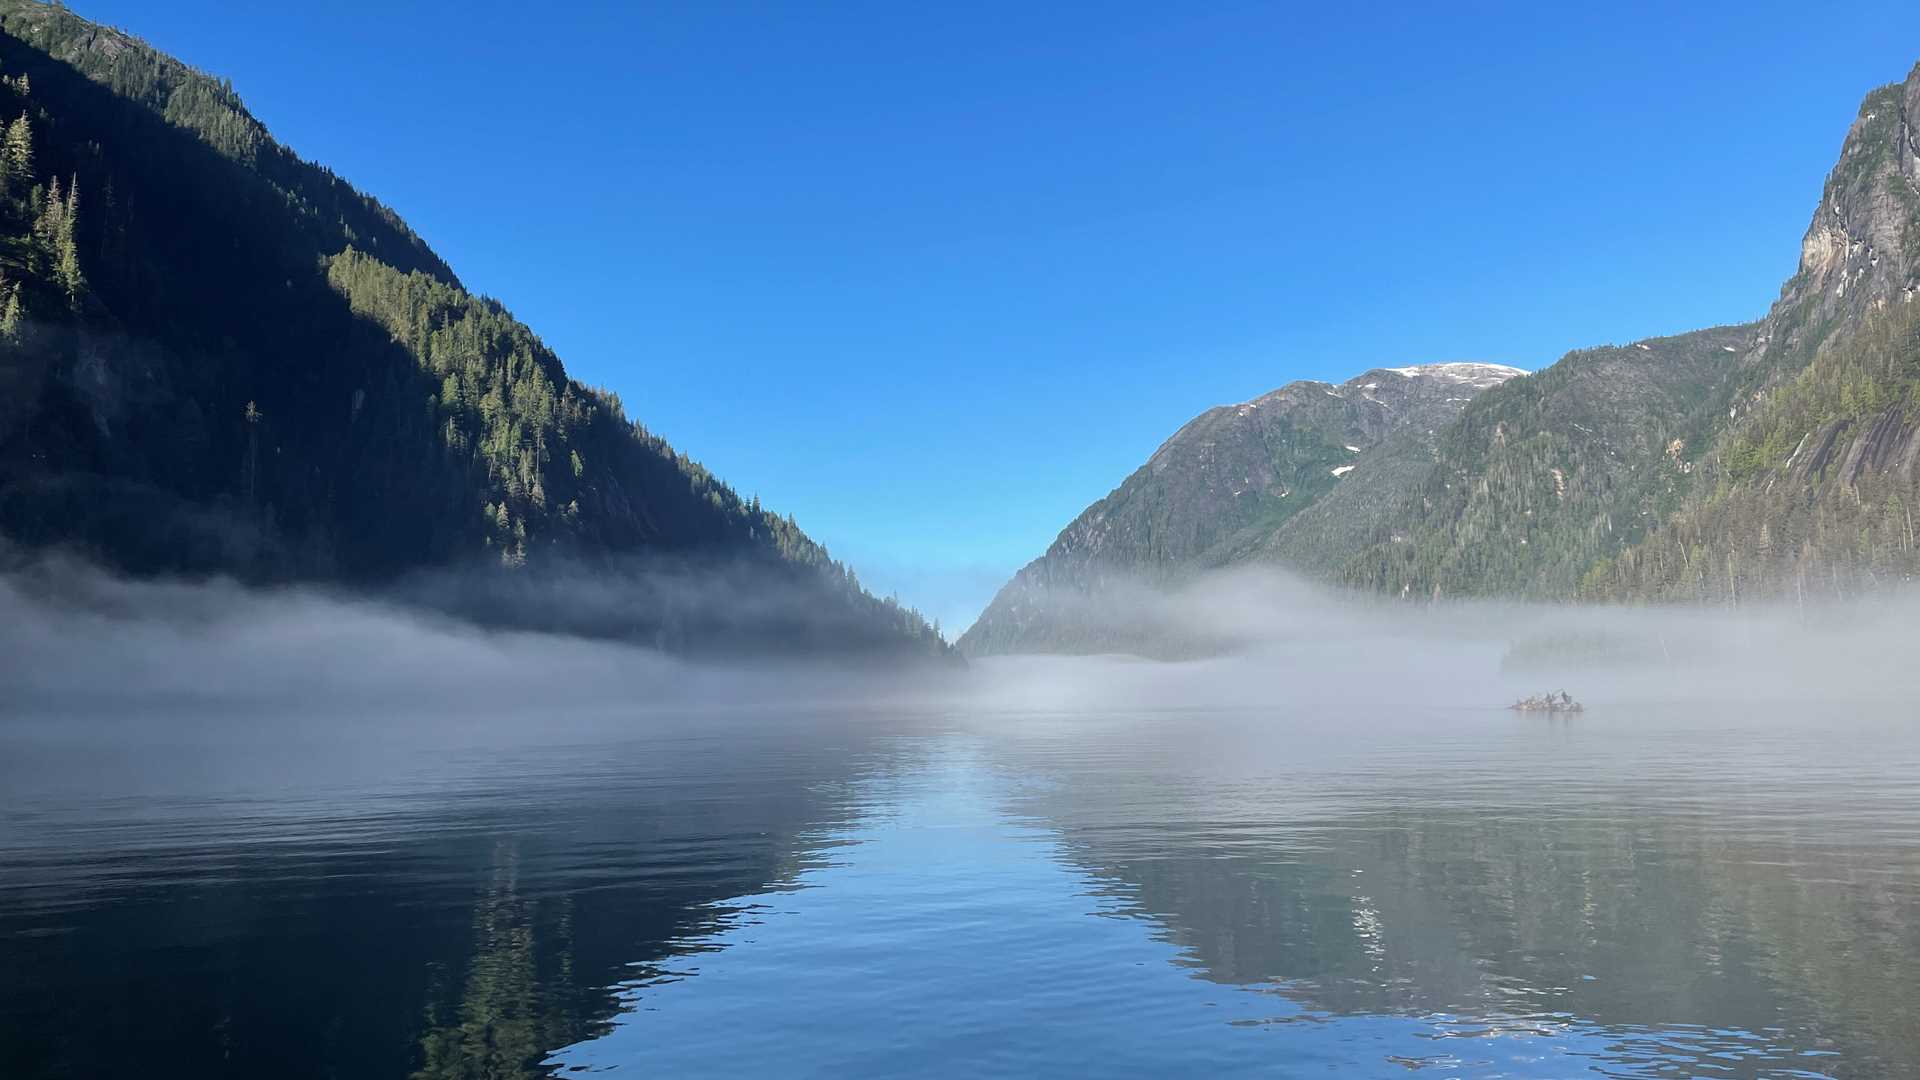 Misty Fjords National Monument and Behm Canal